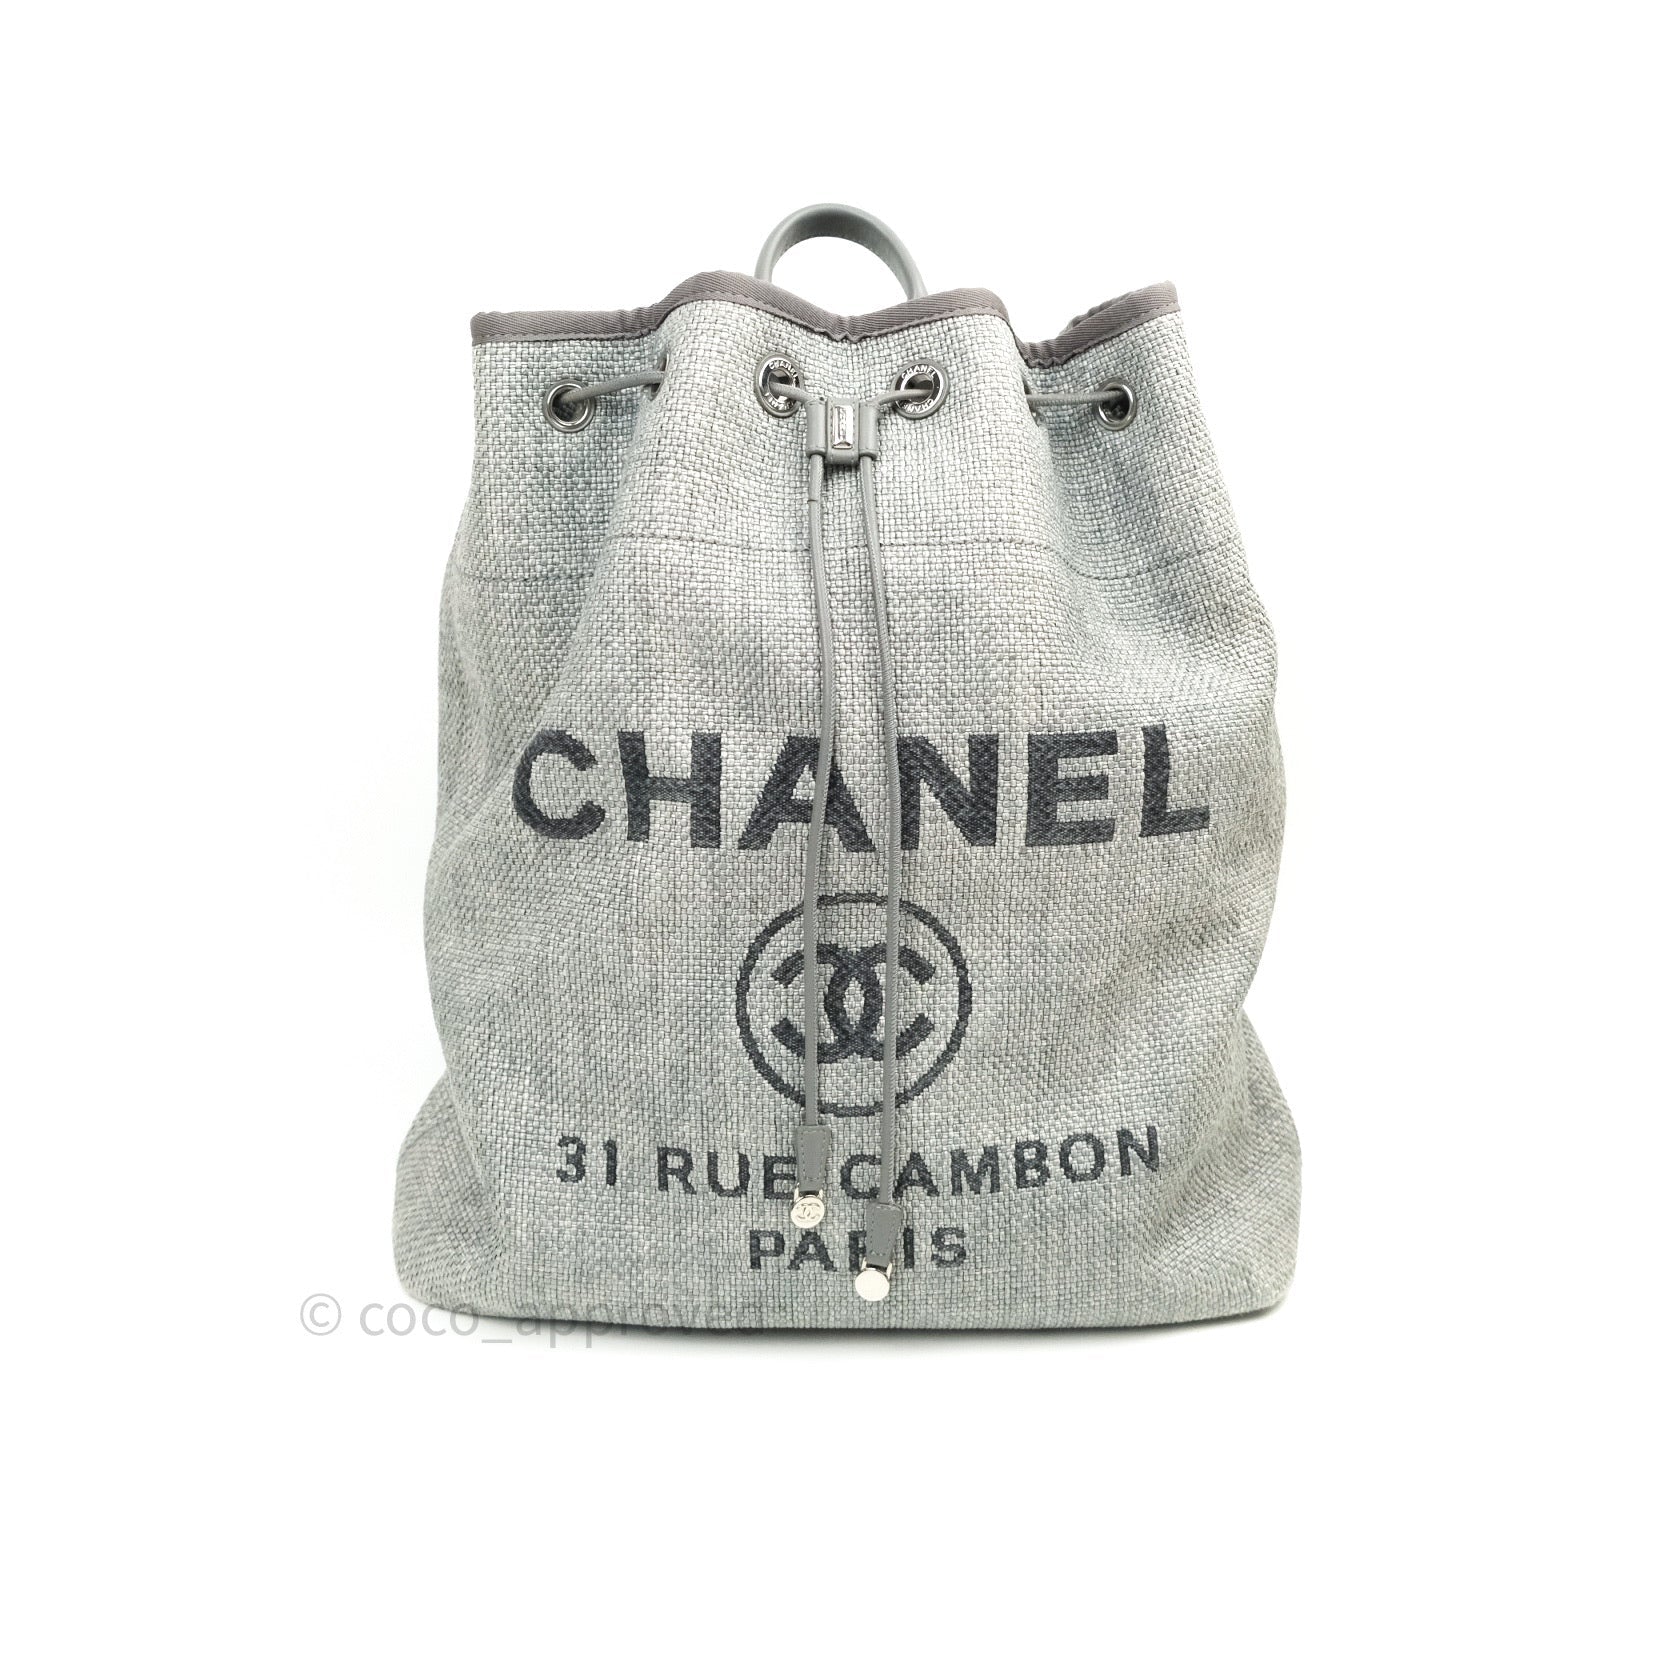 CHANEL, Bags, Authentic Chanel Deauville Tote